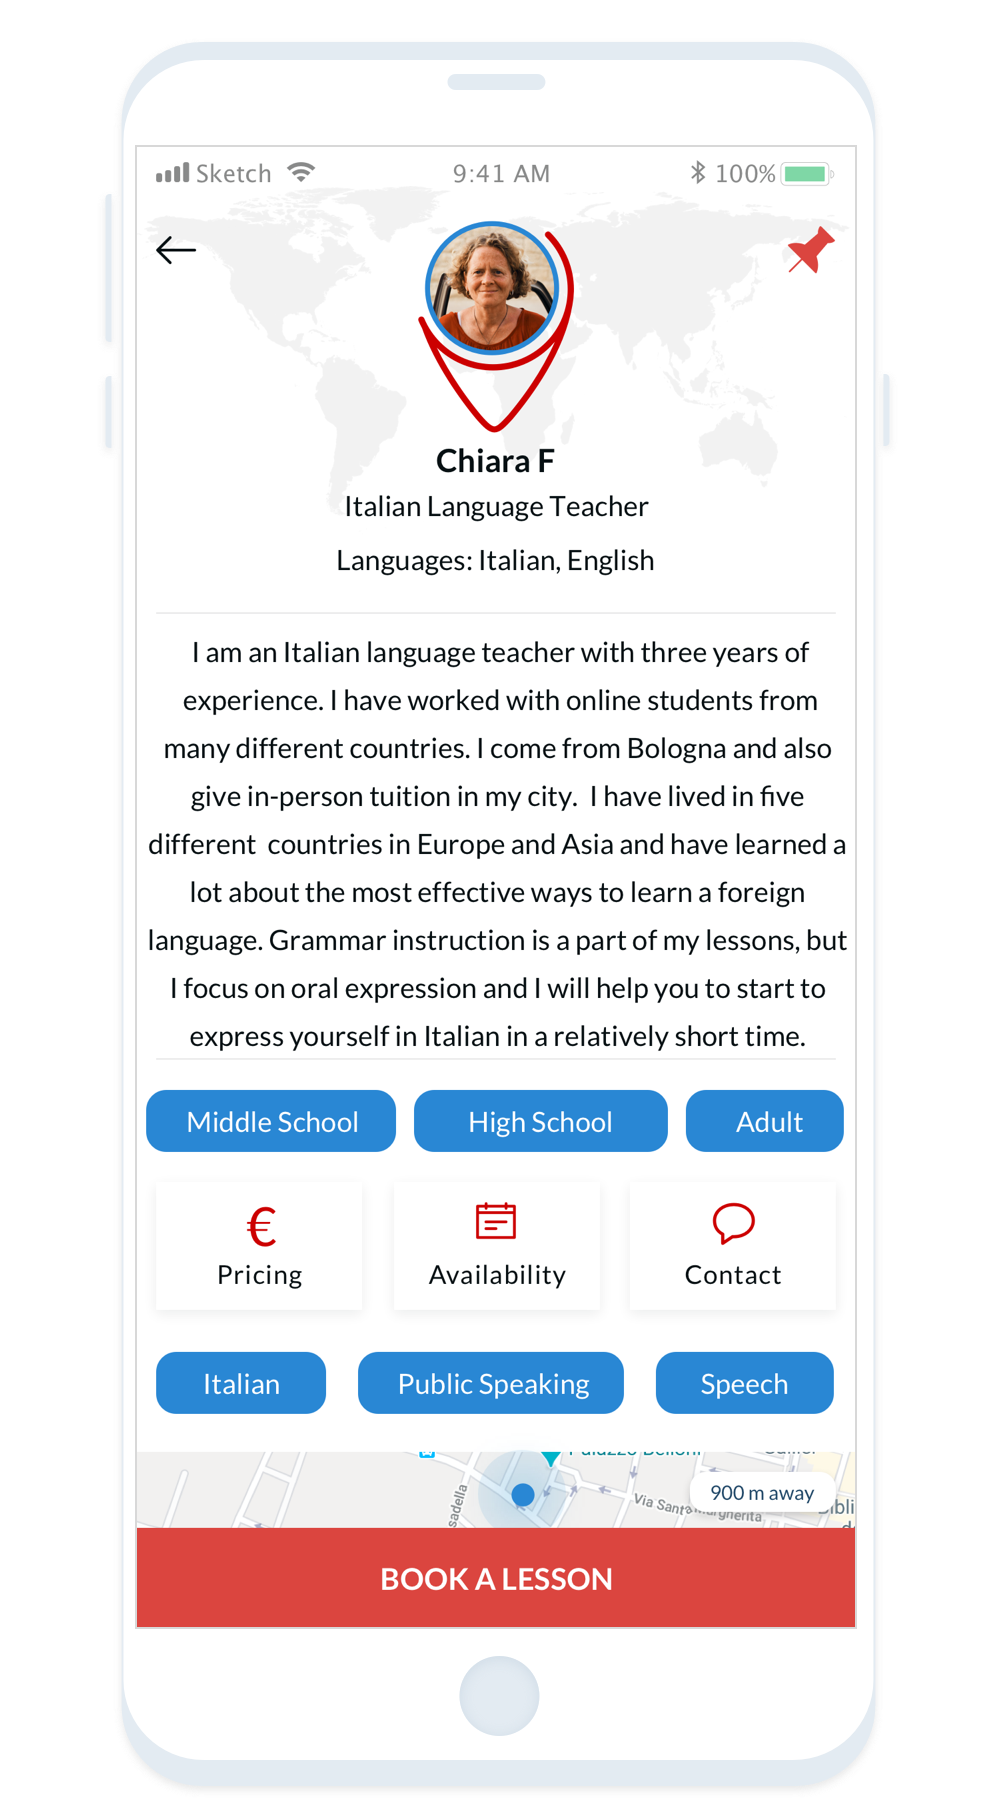 Easily find a foriegn language Tutor online or near me and learn Italian from a native speaker.